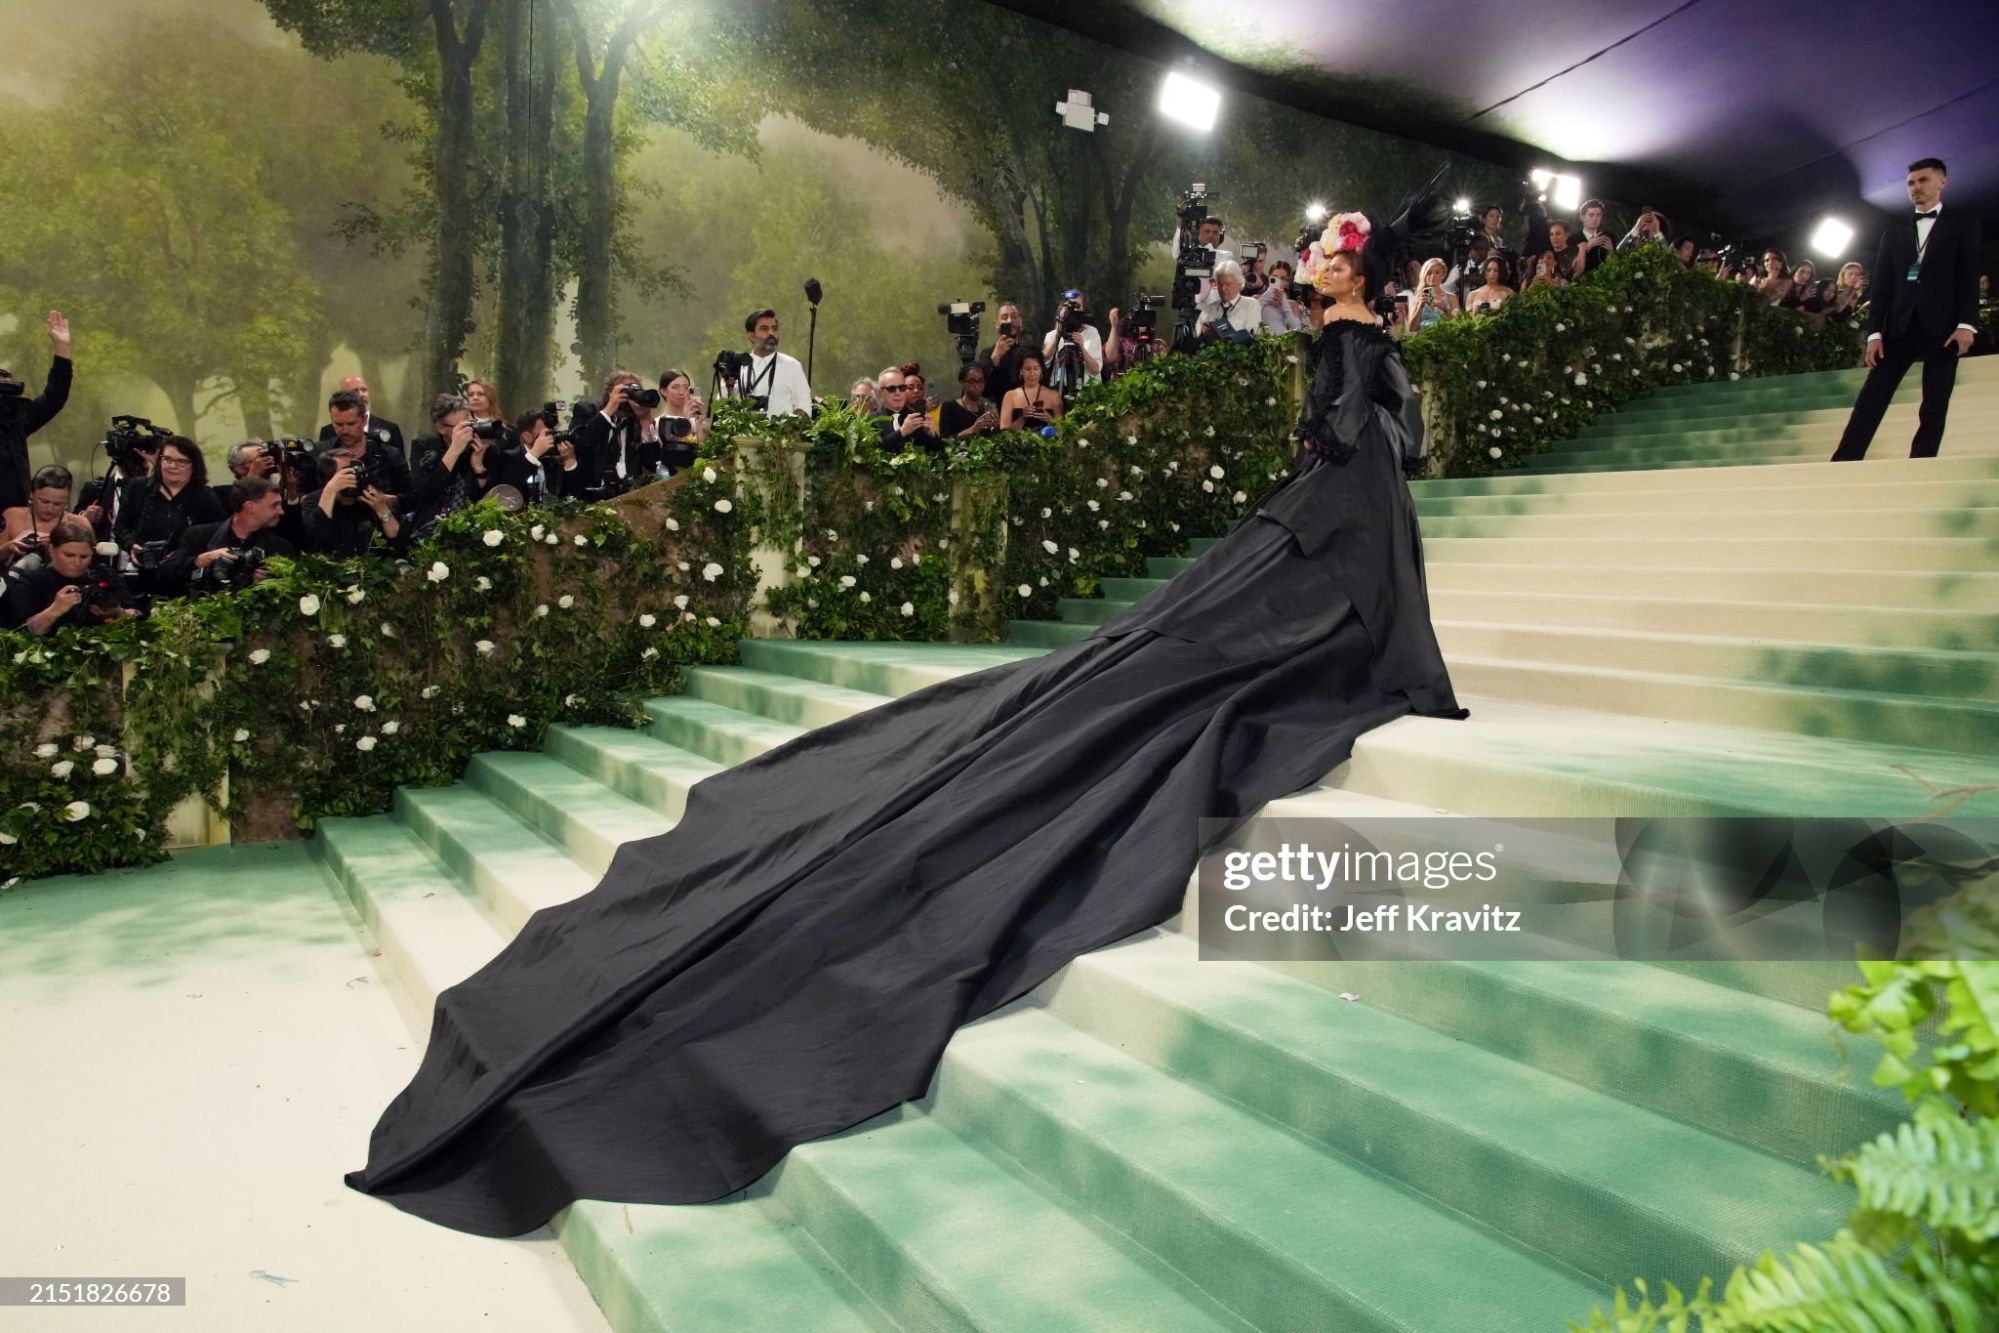 gettyimages-2151826678-2048x2048.jpg